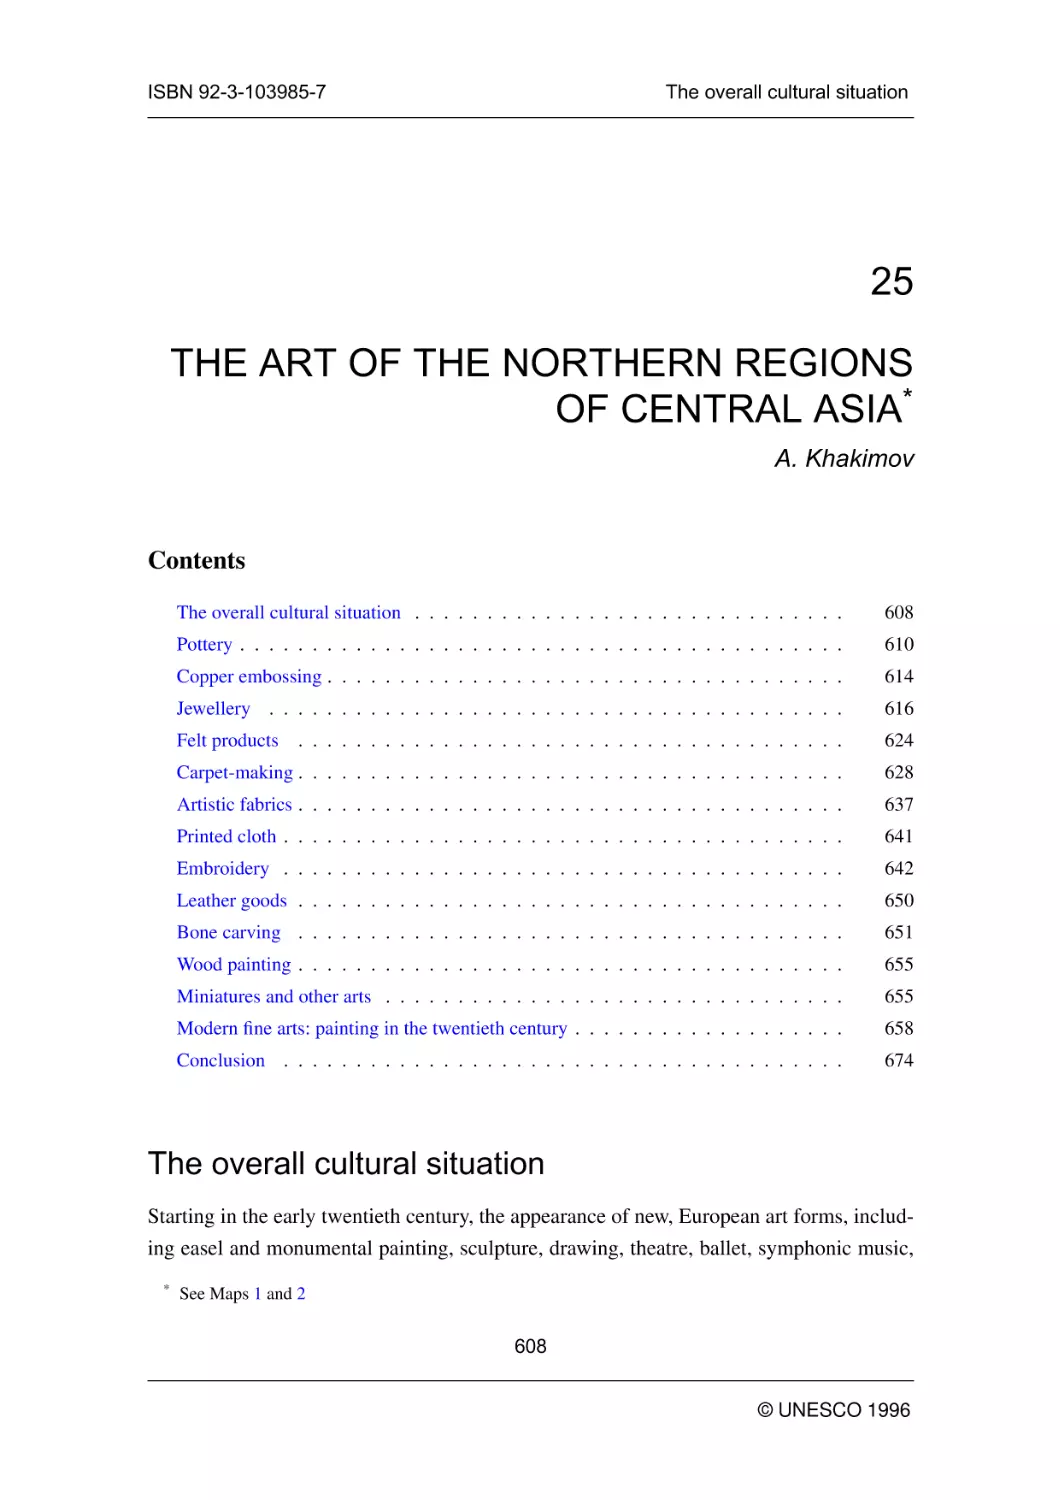 THE ART OF THE NORTHERN REGIONS OF CENTRAL ASIA